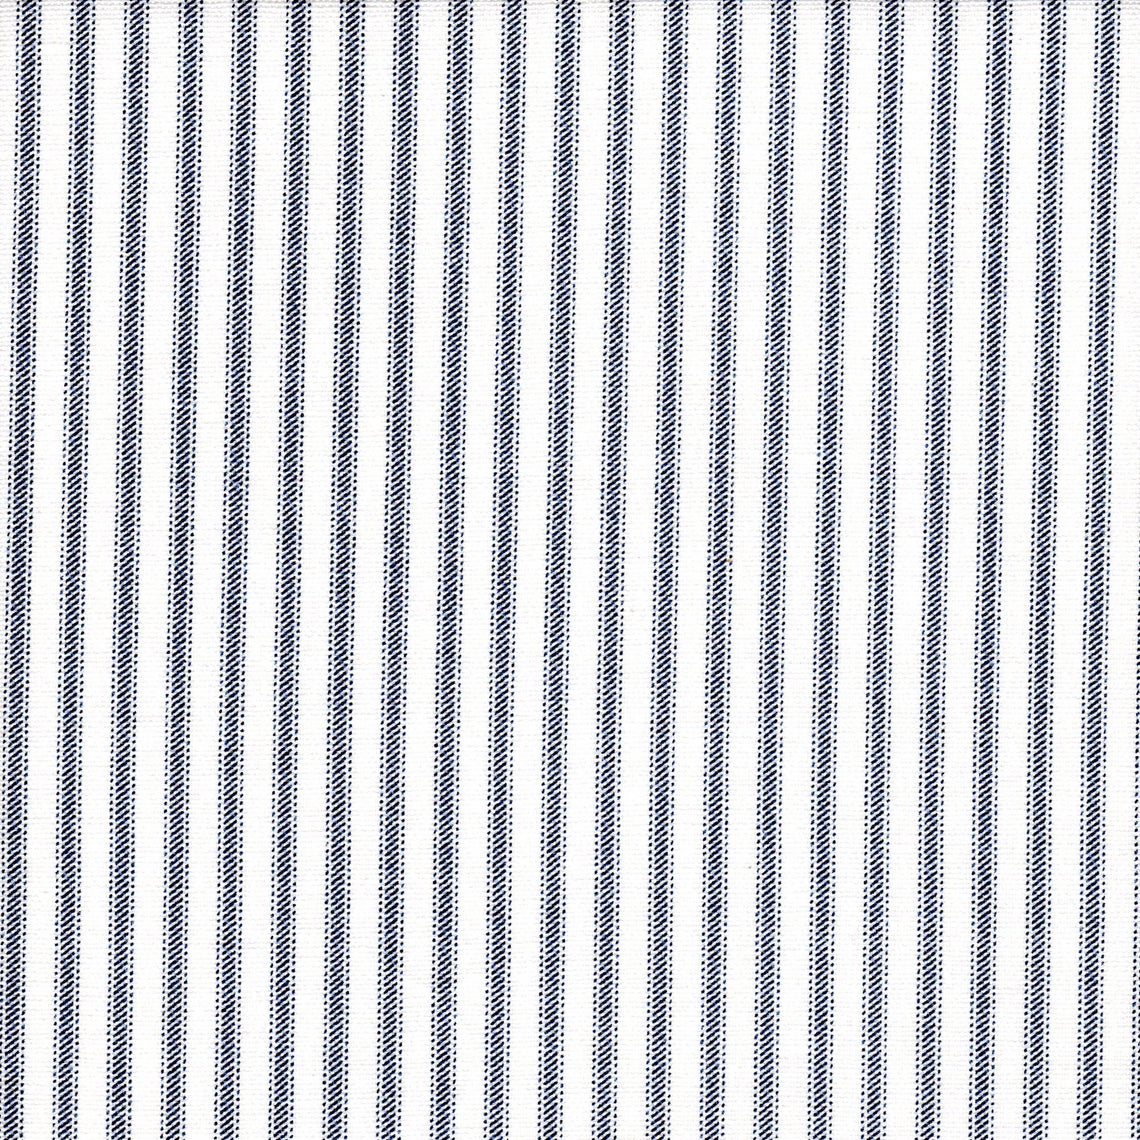 scalloped valance in classic navy blue ticking stripe on white